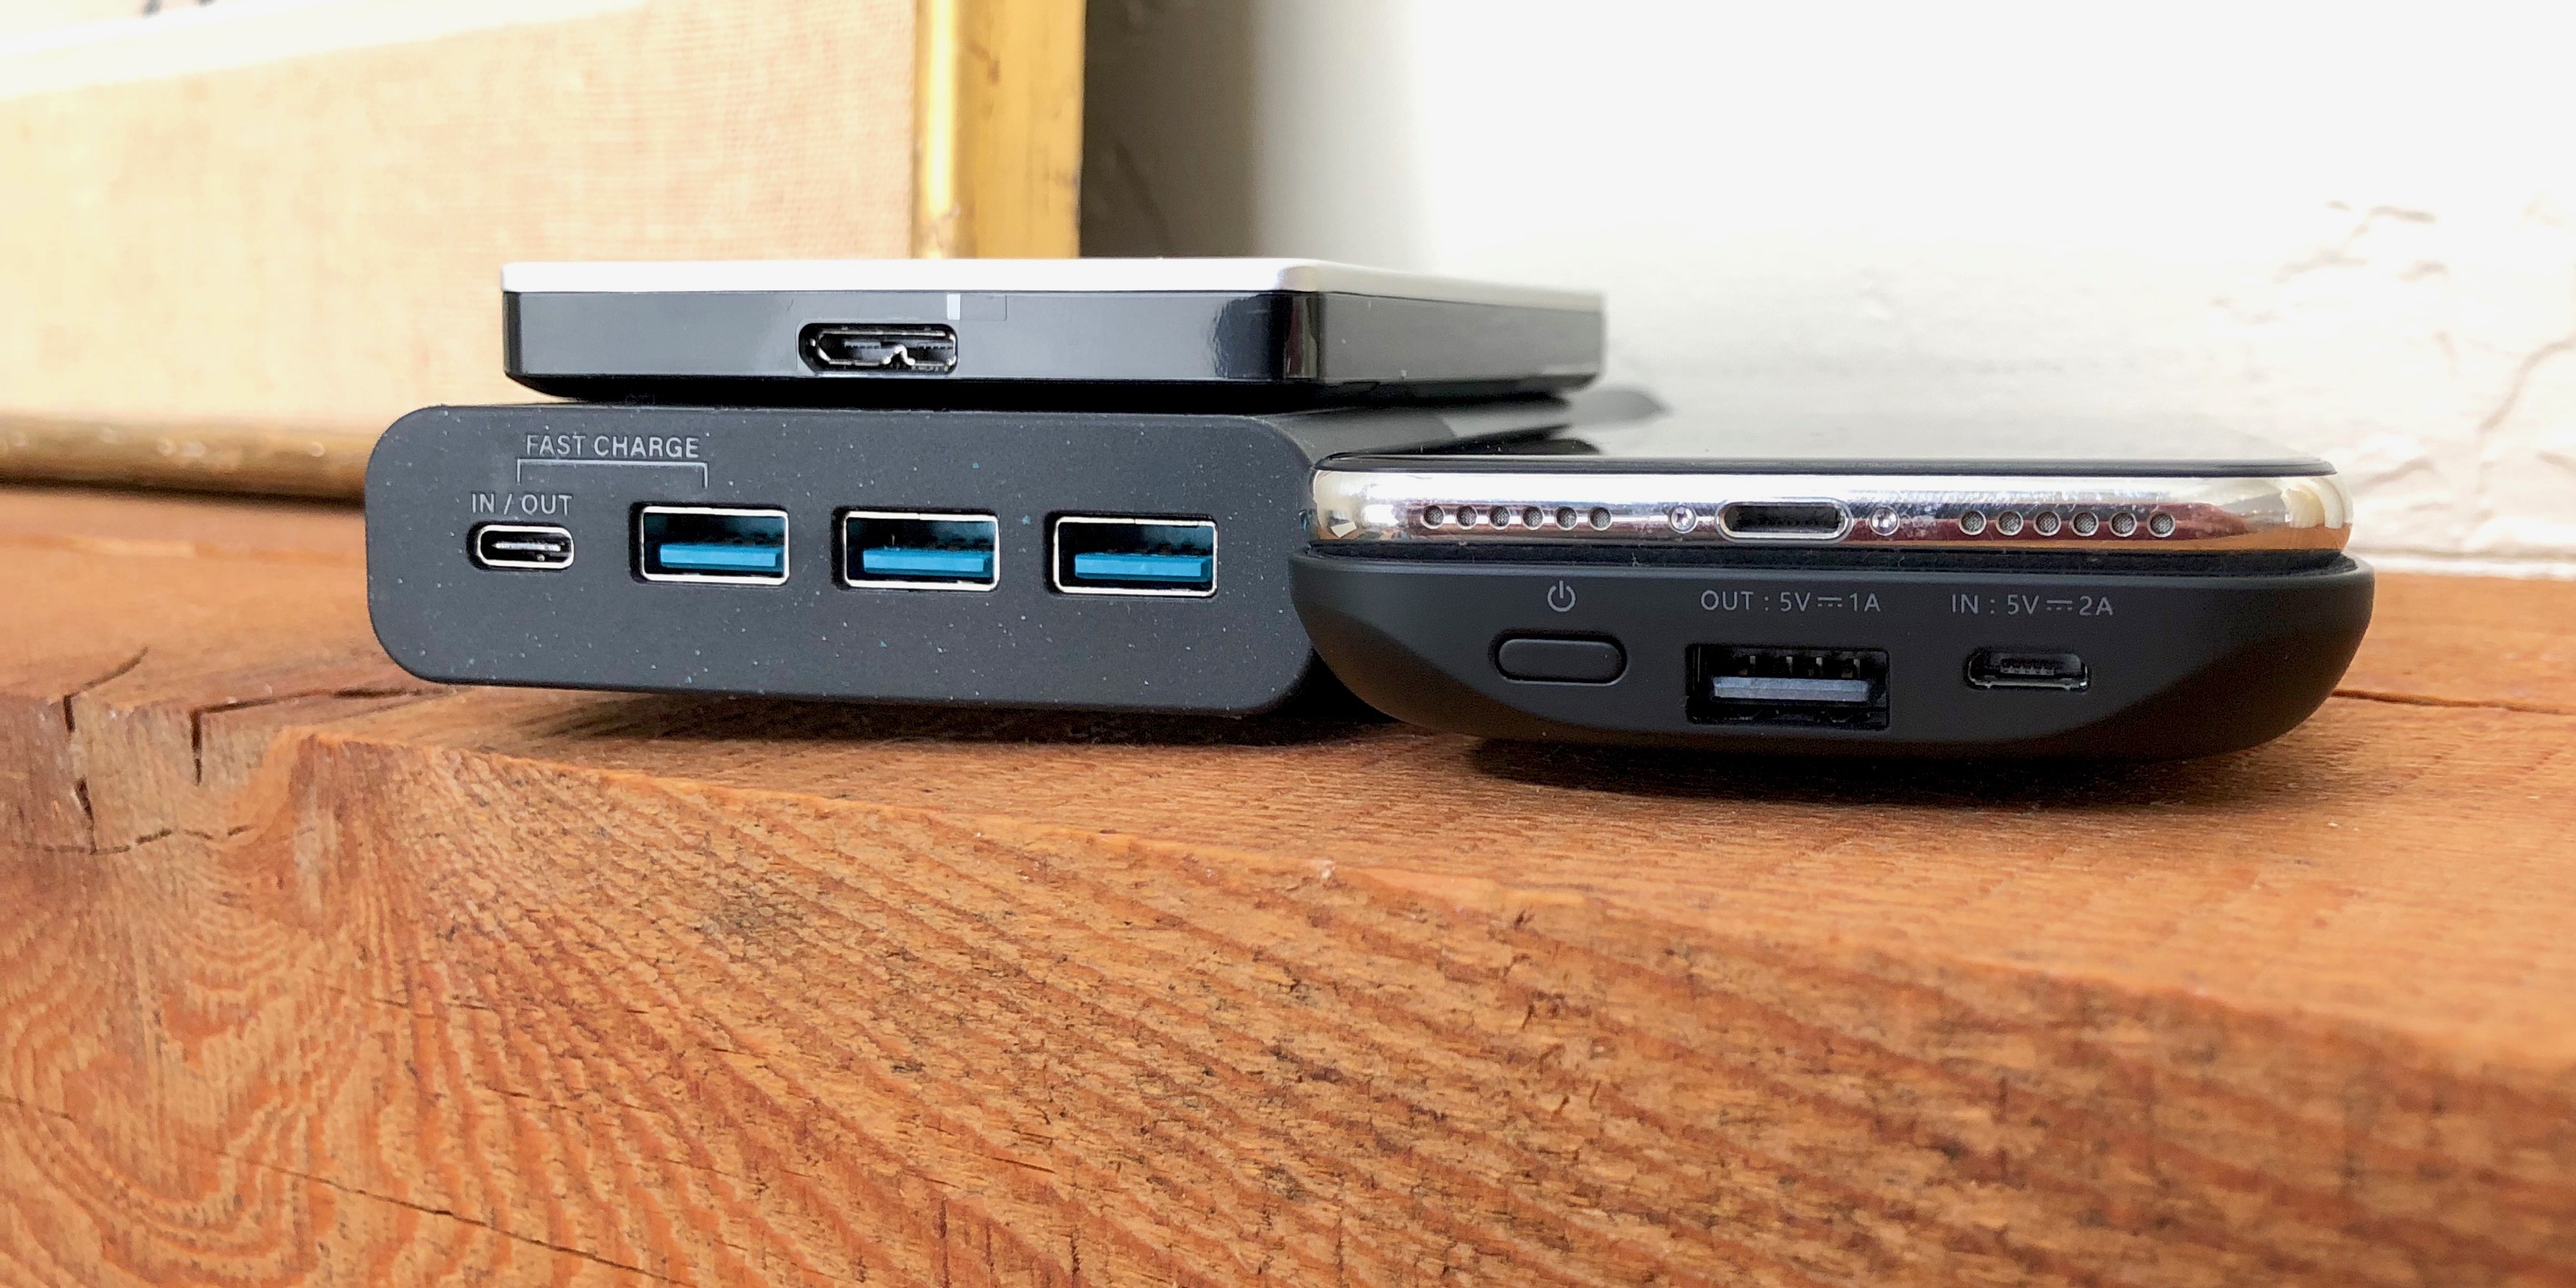 Layouten gå på pension gispende What USB ports are on Apple devices and other electronics? - 9to5Mac